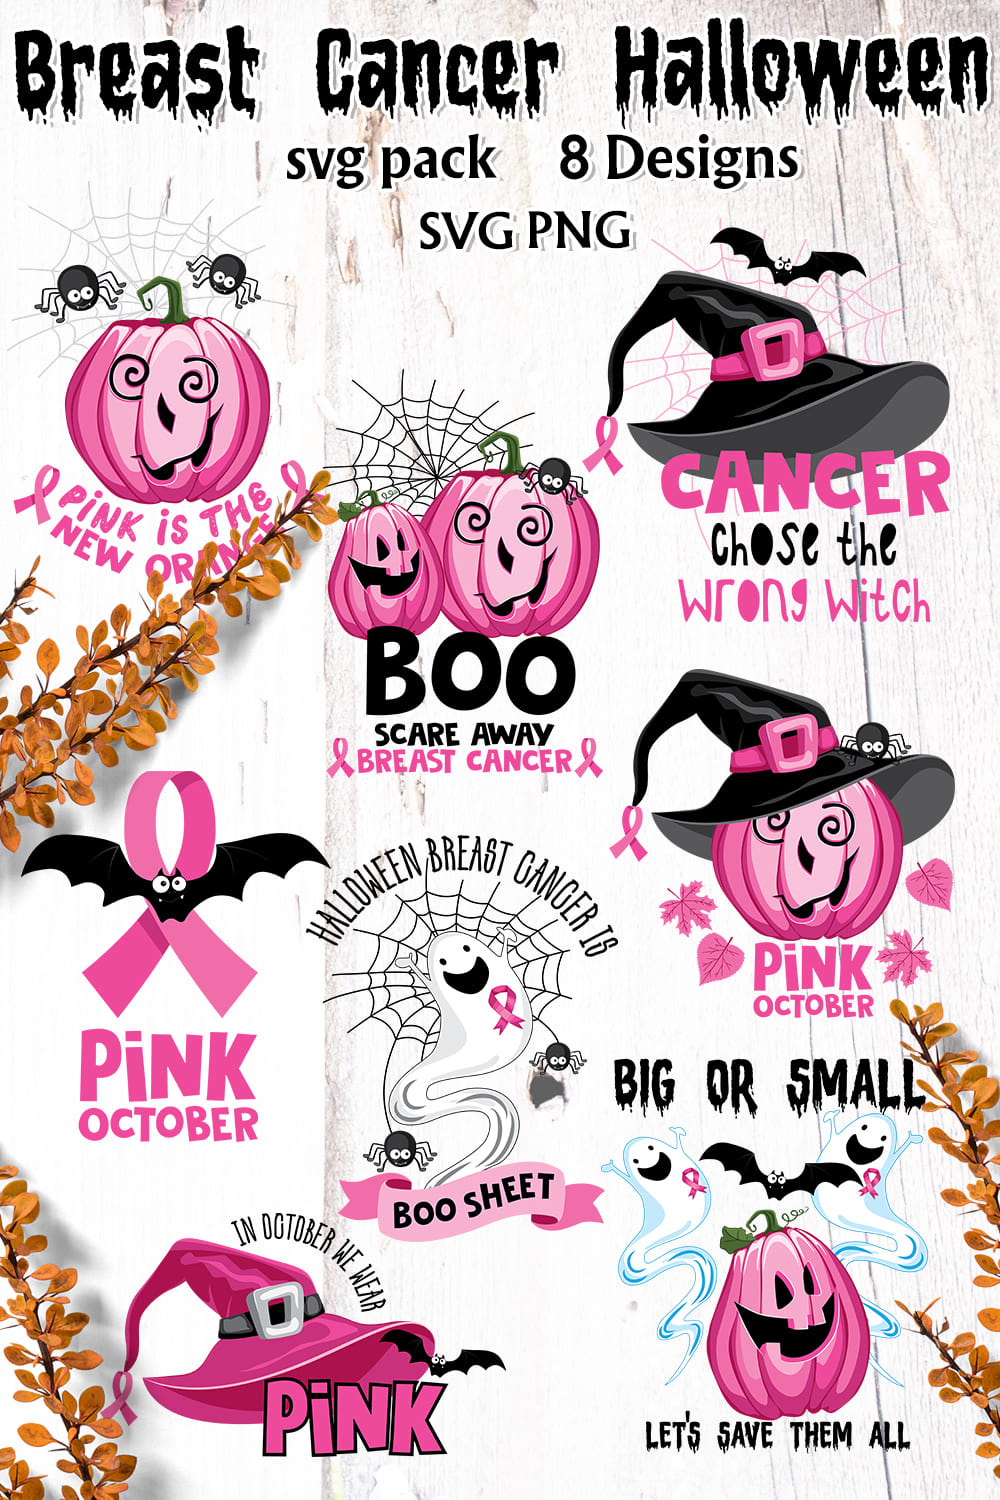 Diverse of breast cancer halloween elements.